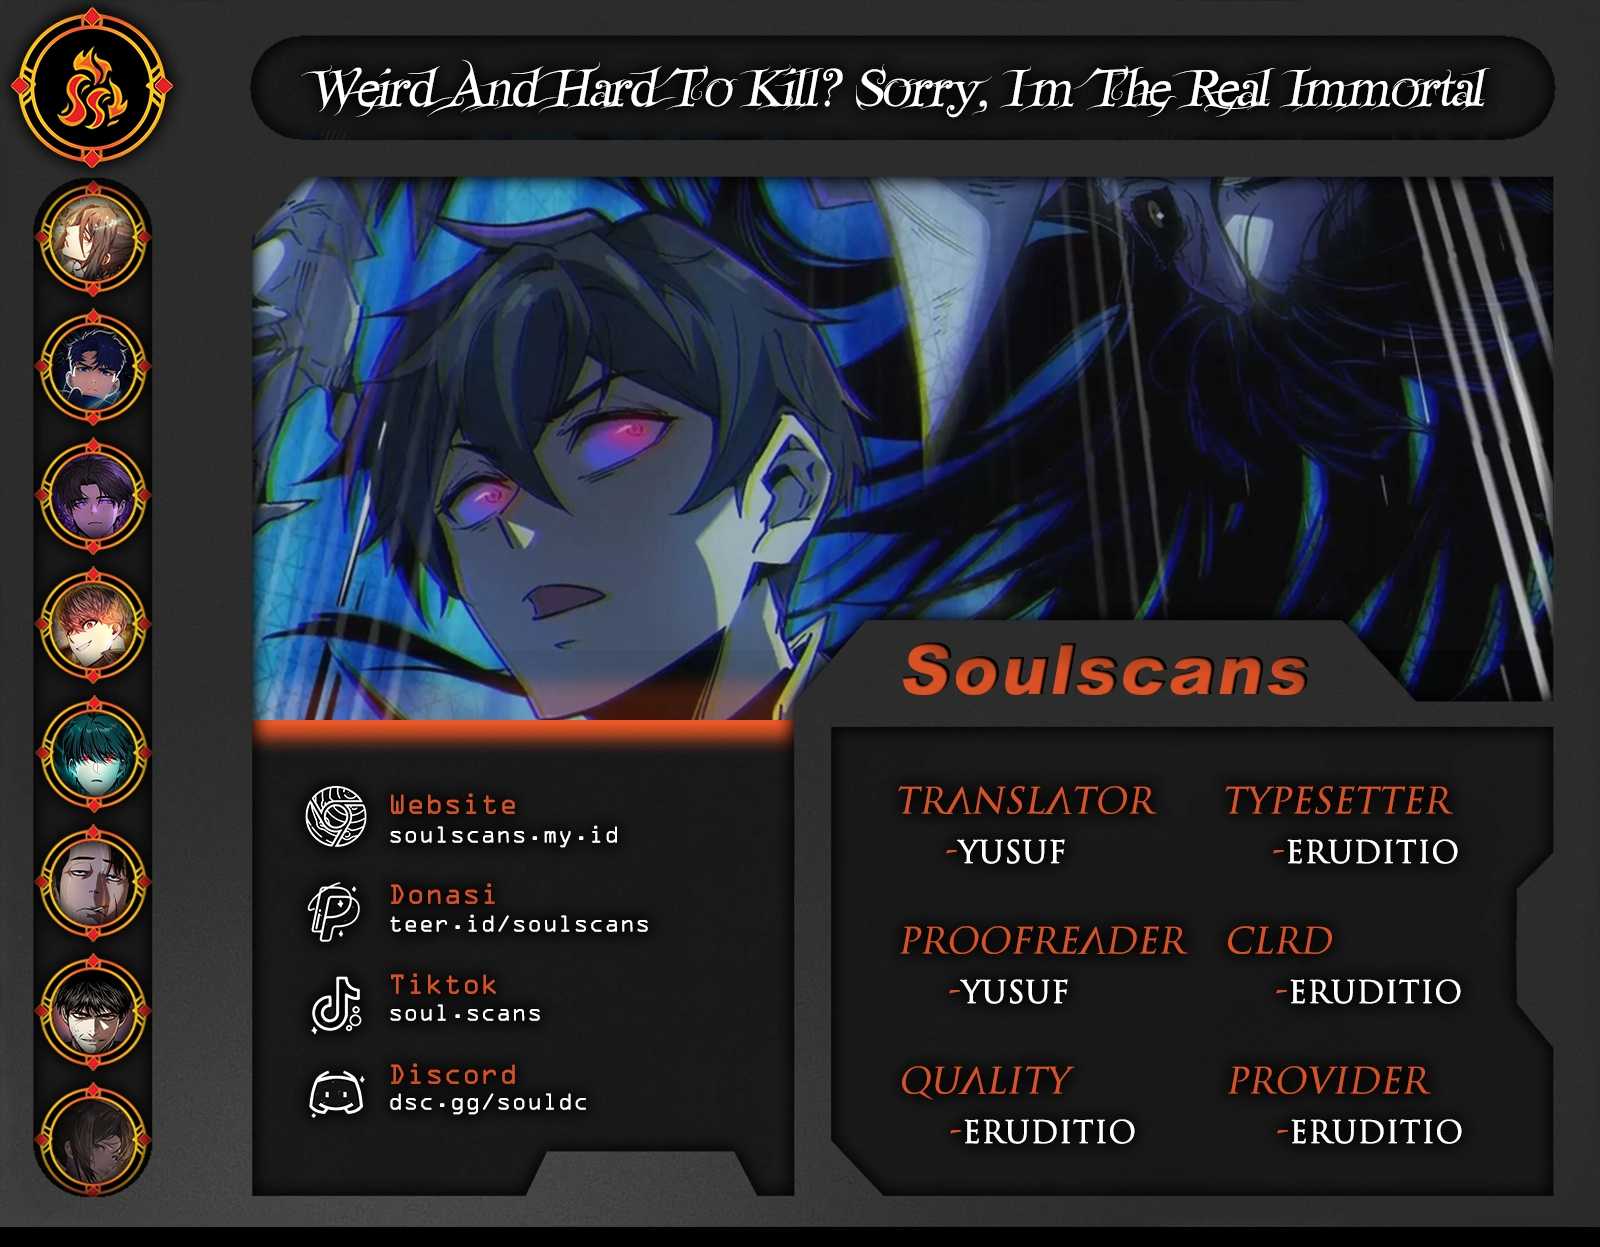 Weird And Hard To Kill Sorry, I’m The Real Immortal Chapter 23